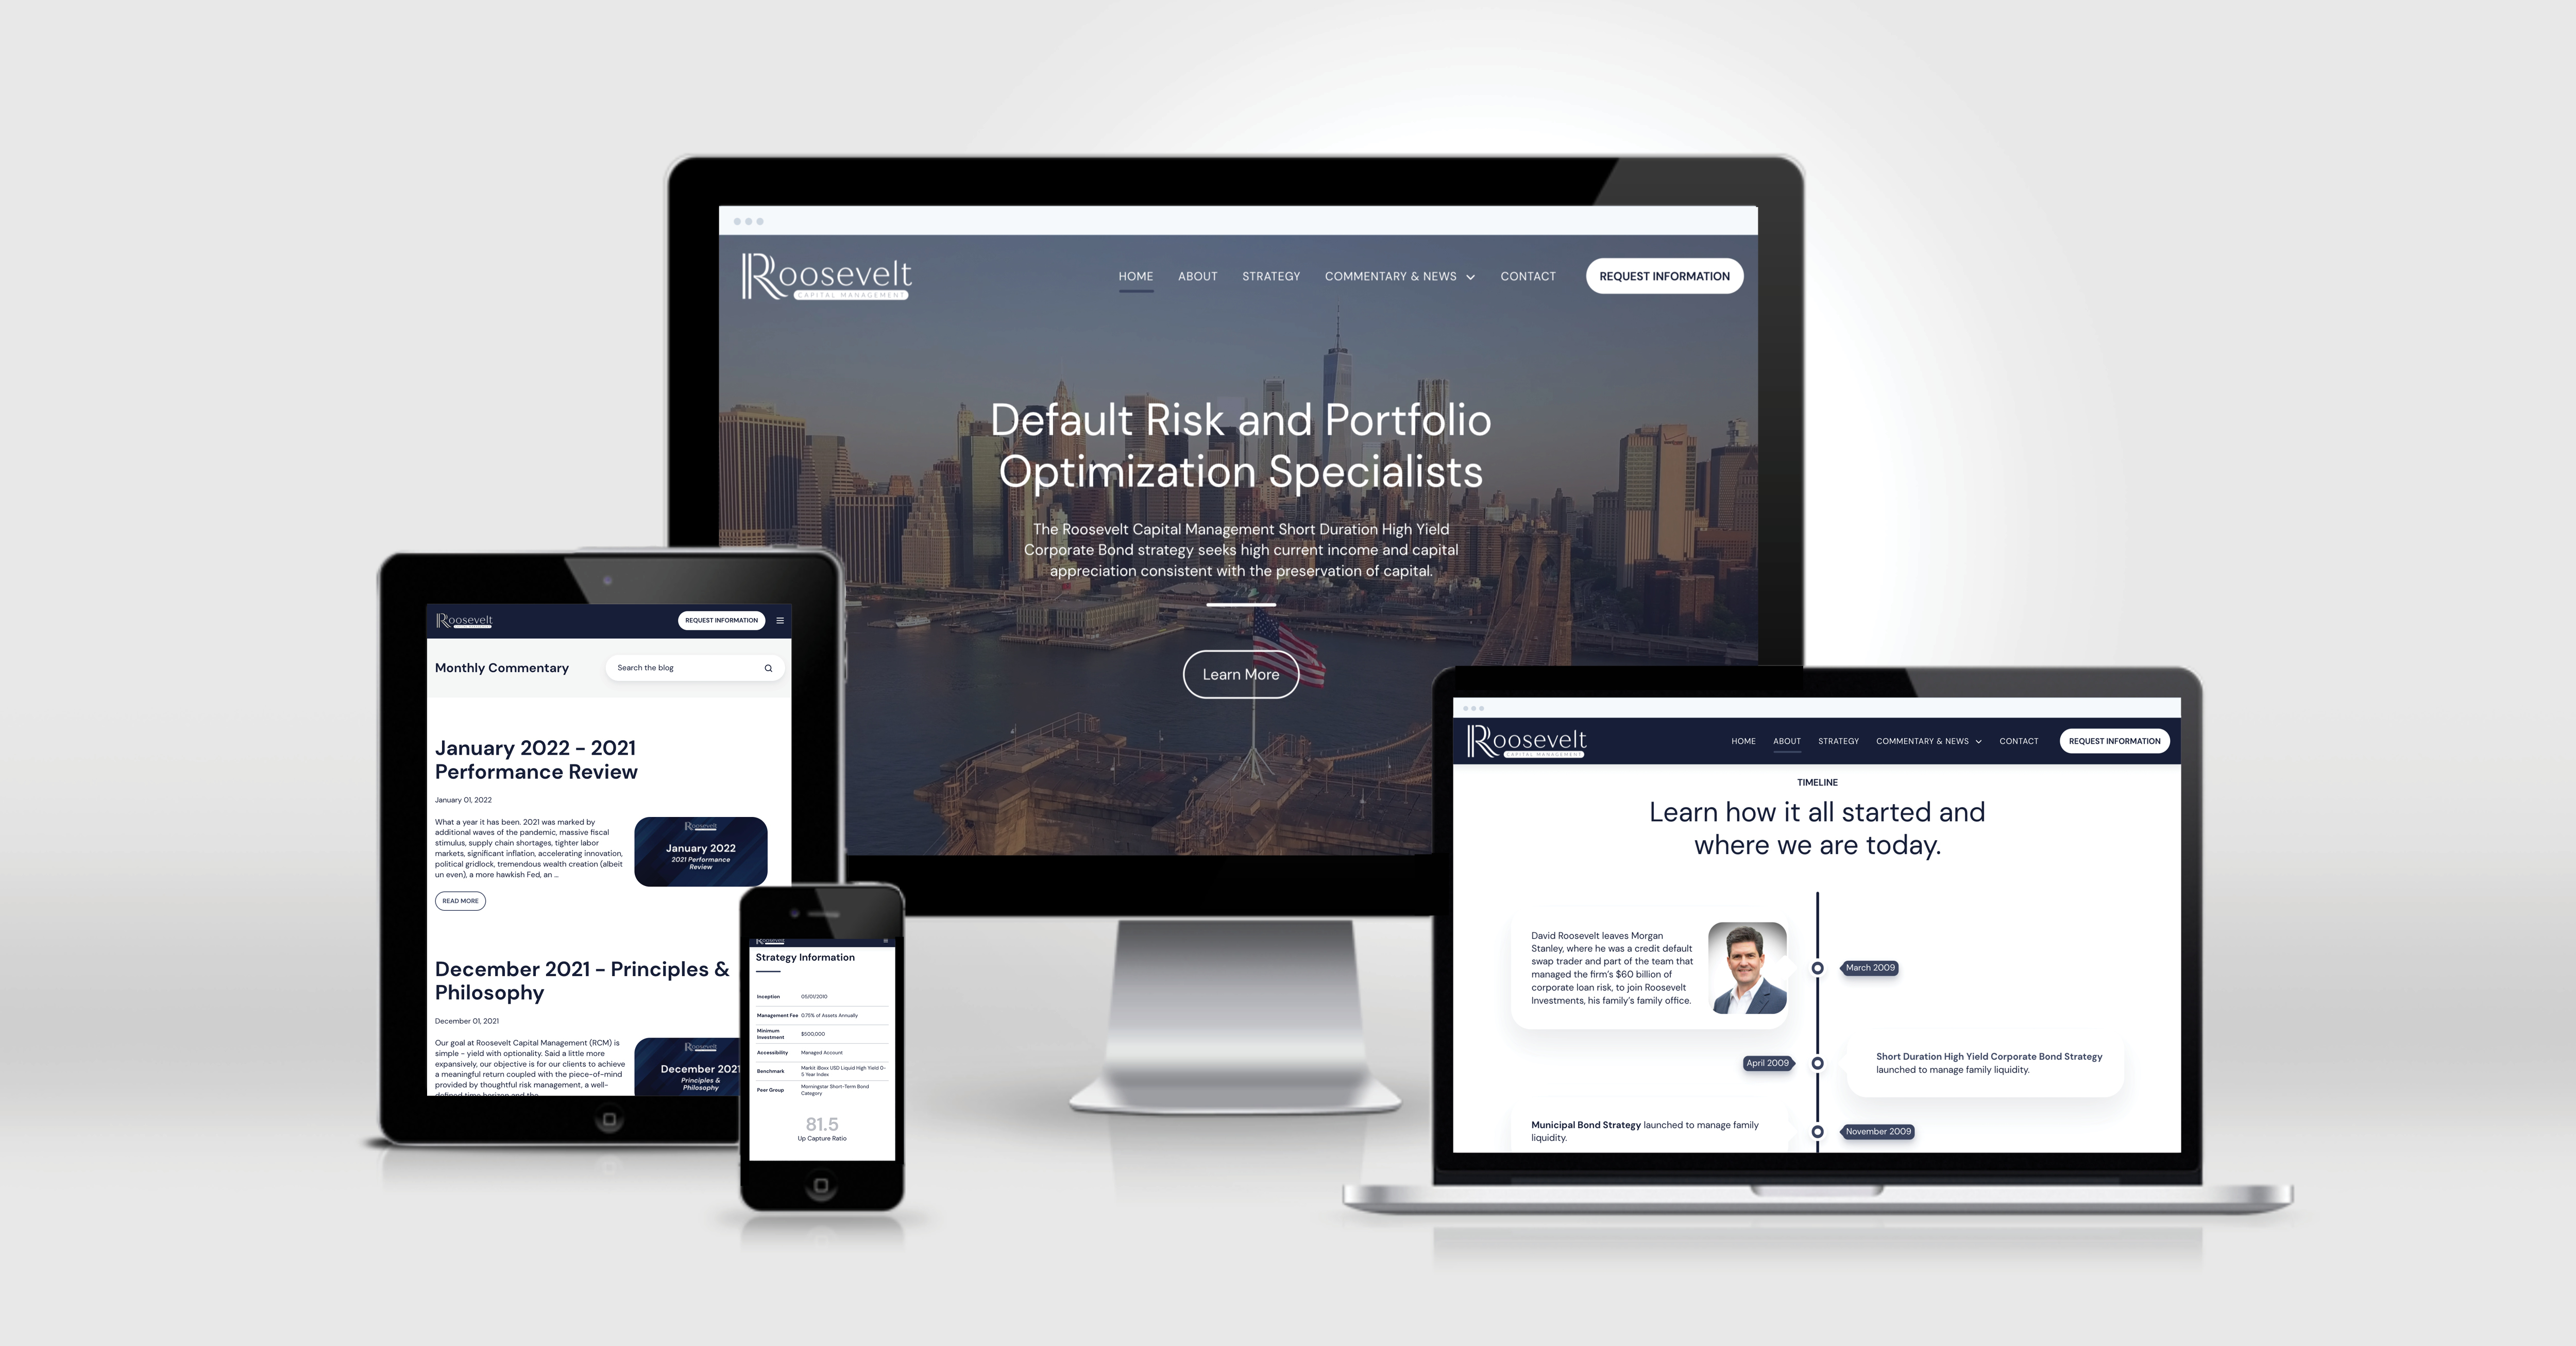 Announcing the Roosevelt Capital Management New Web Site